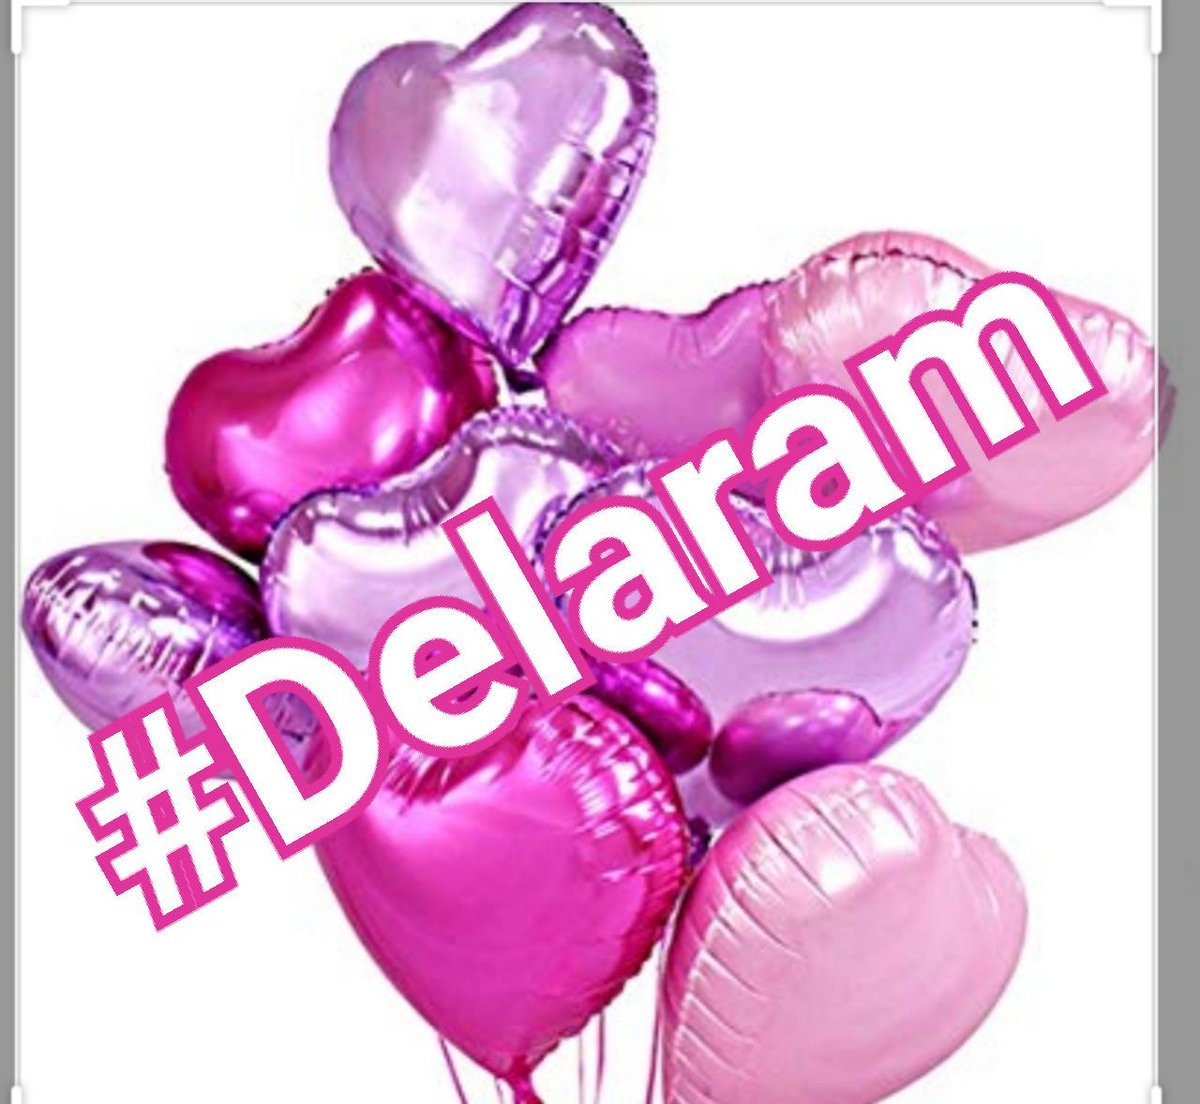 Happy birthday #Delaram.May you always be filled with happiness each and every day.I'm pretty sure that you will grow up to be a bright and beautiful girl someday since you bring so much happiness wherever you go.Happy birthday,sweet angel.
#SaveDelaram
#IranianRefugeesInTurkey